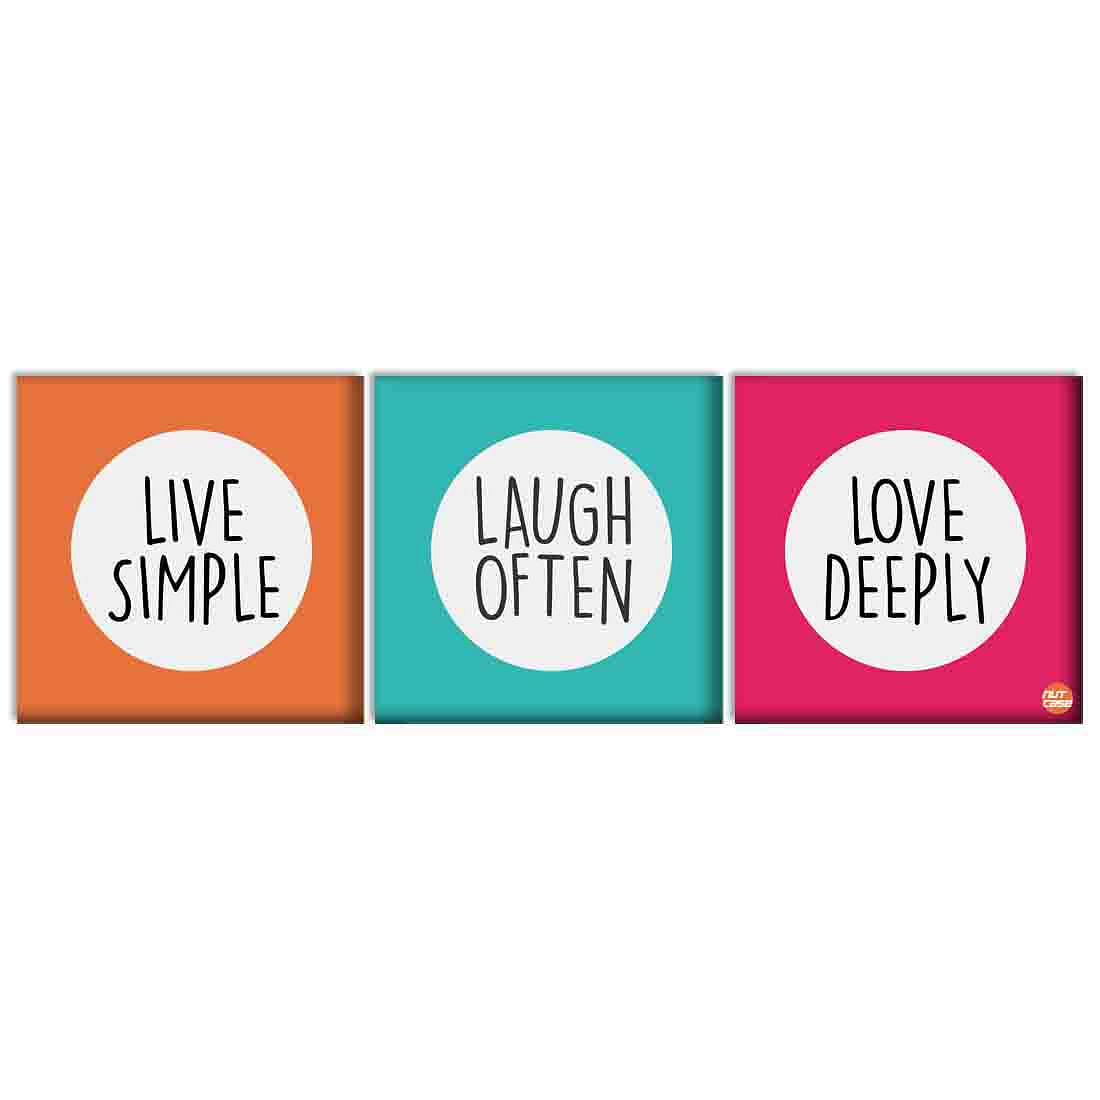 Wall Art Decor Hanging Panels Set Of 3 -Live Simple Laugh Often Love Deeply Nutcase